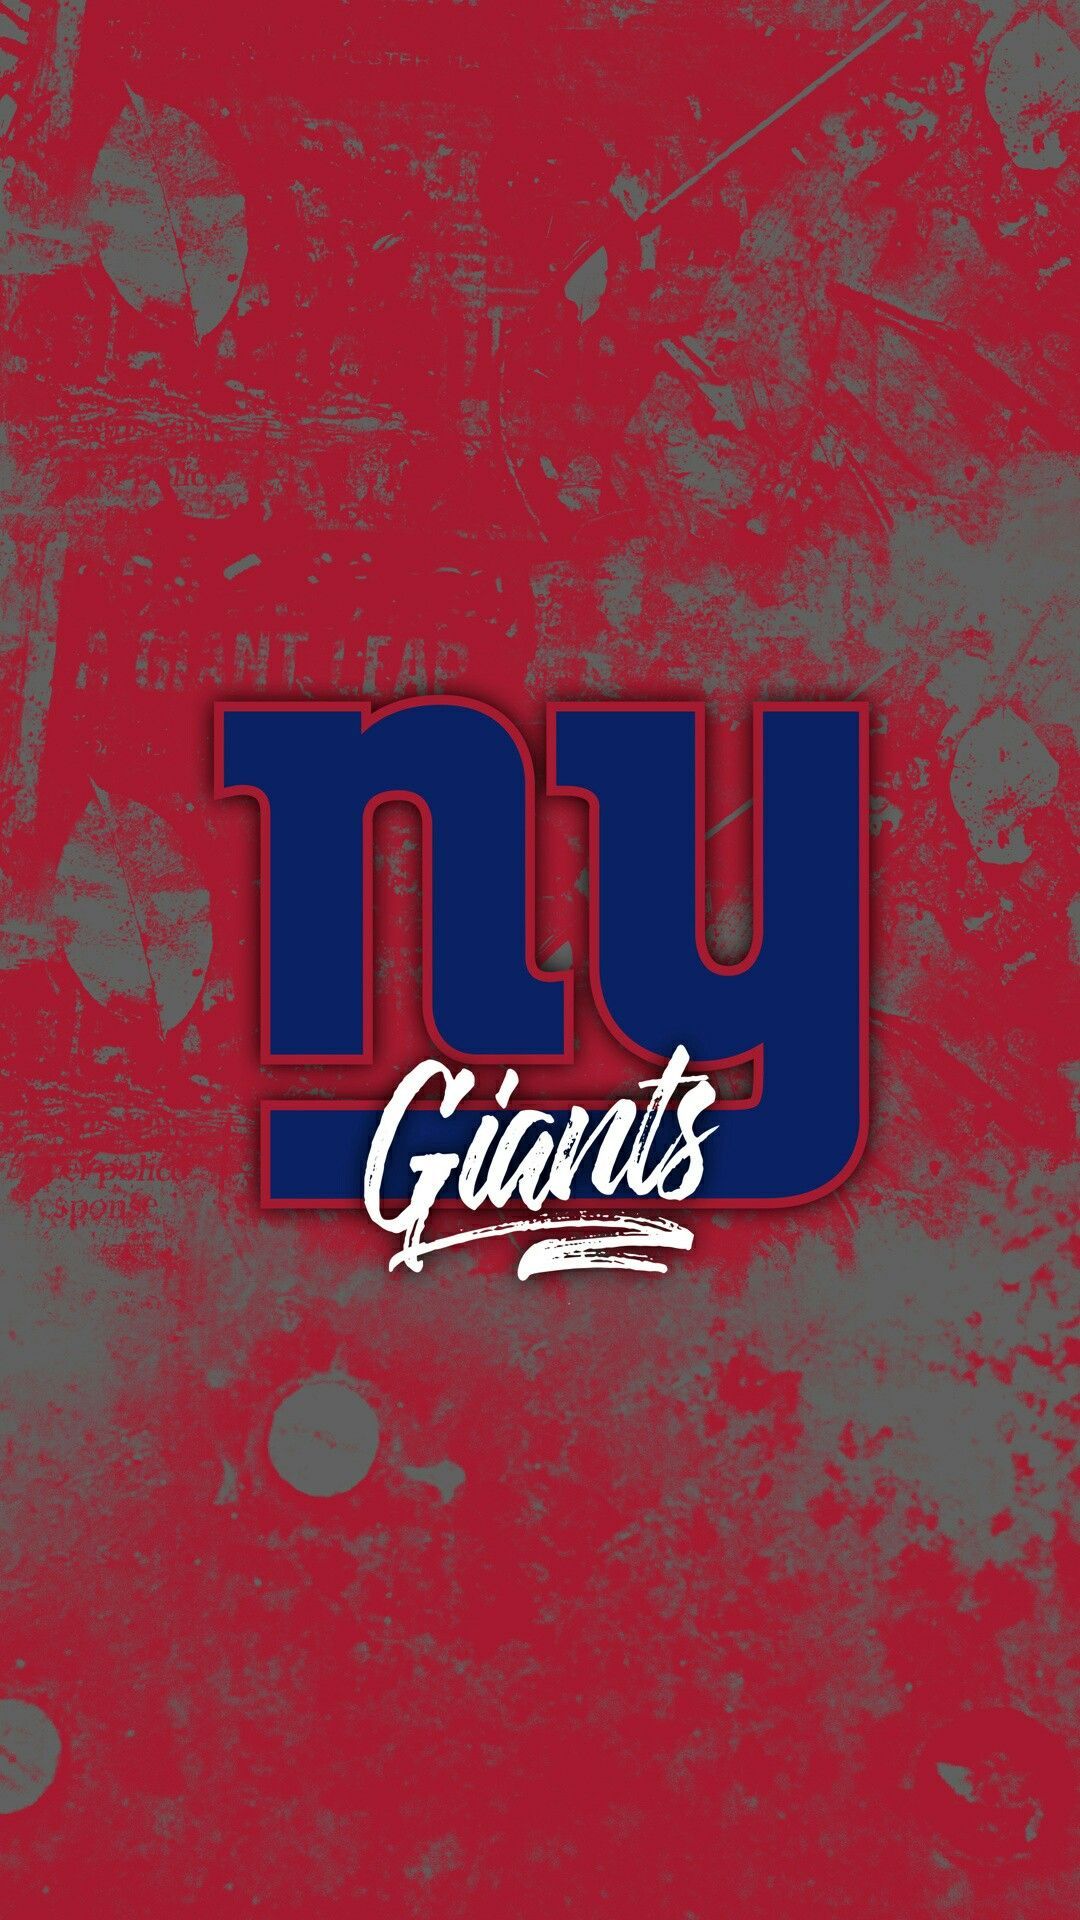 New York Giants Football Wallpapers - Wallpaper Cave